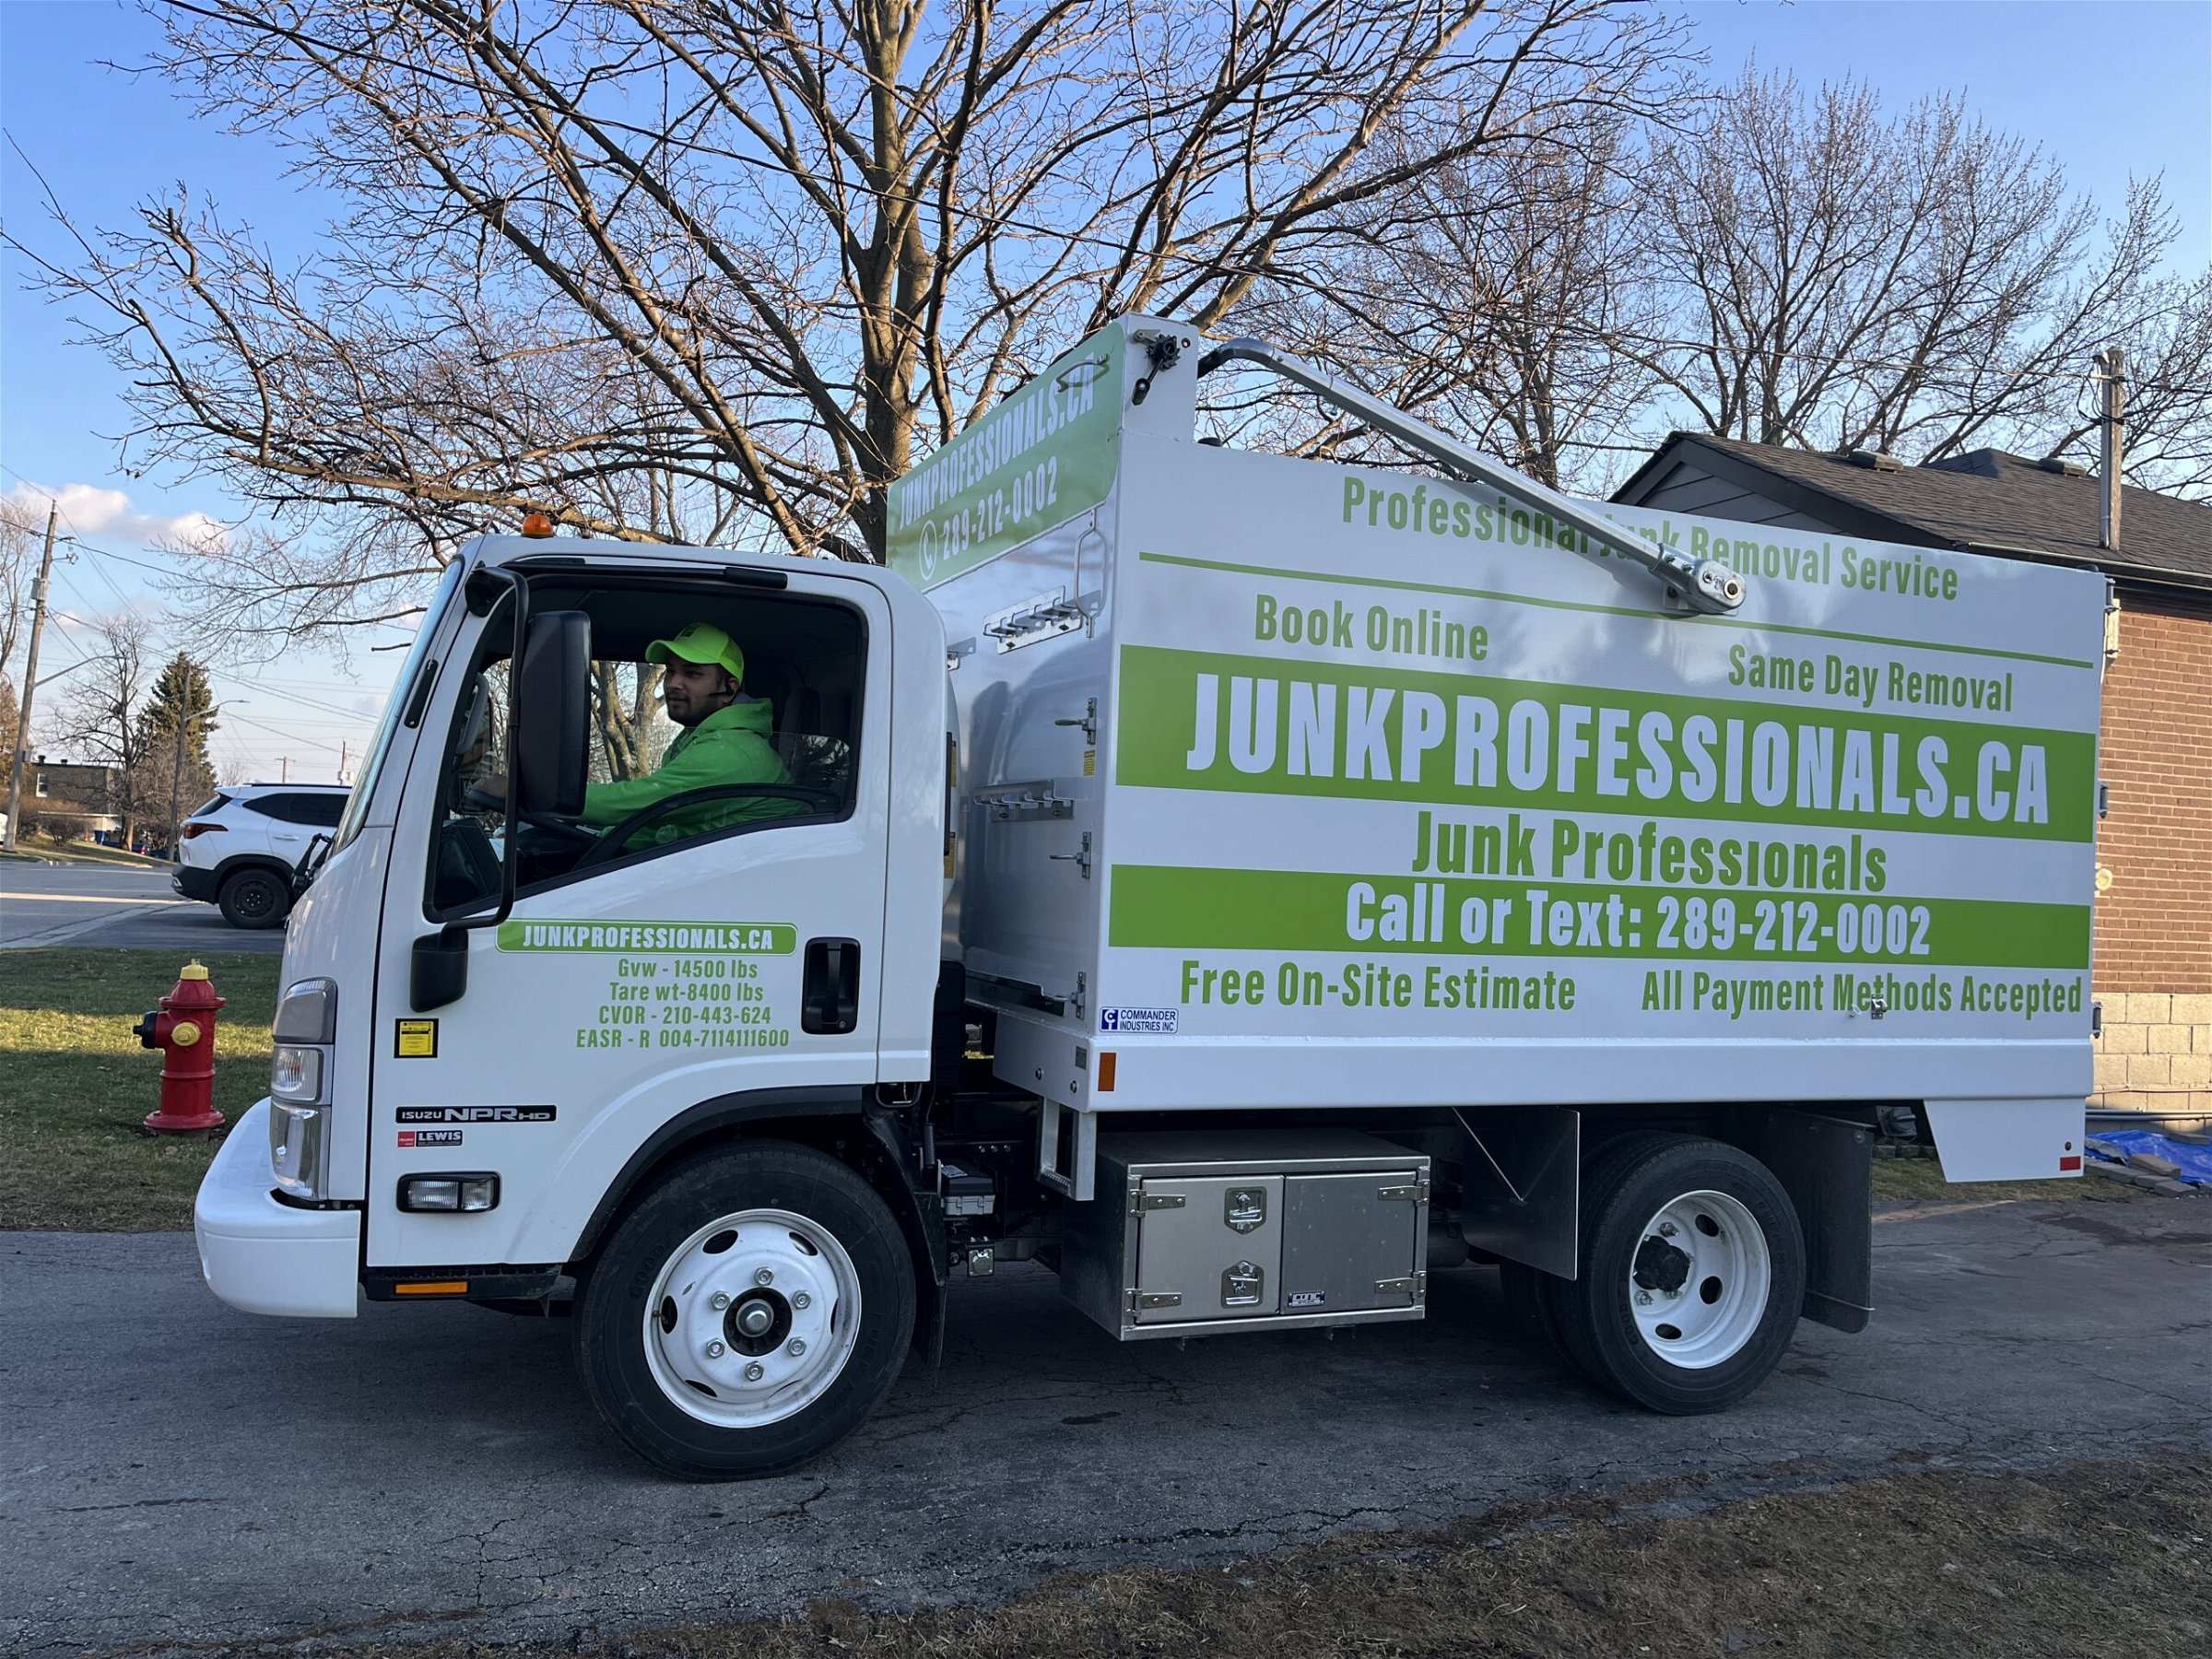 Junk professionals truck with a employee sitting in it is on location to provide warehouse cleanout service